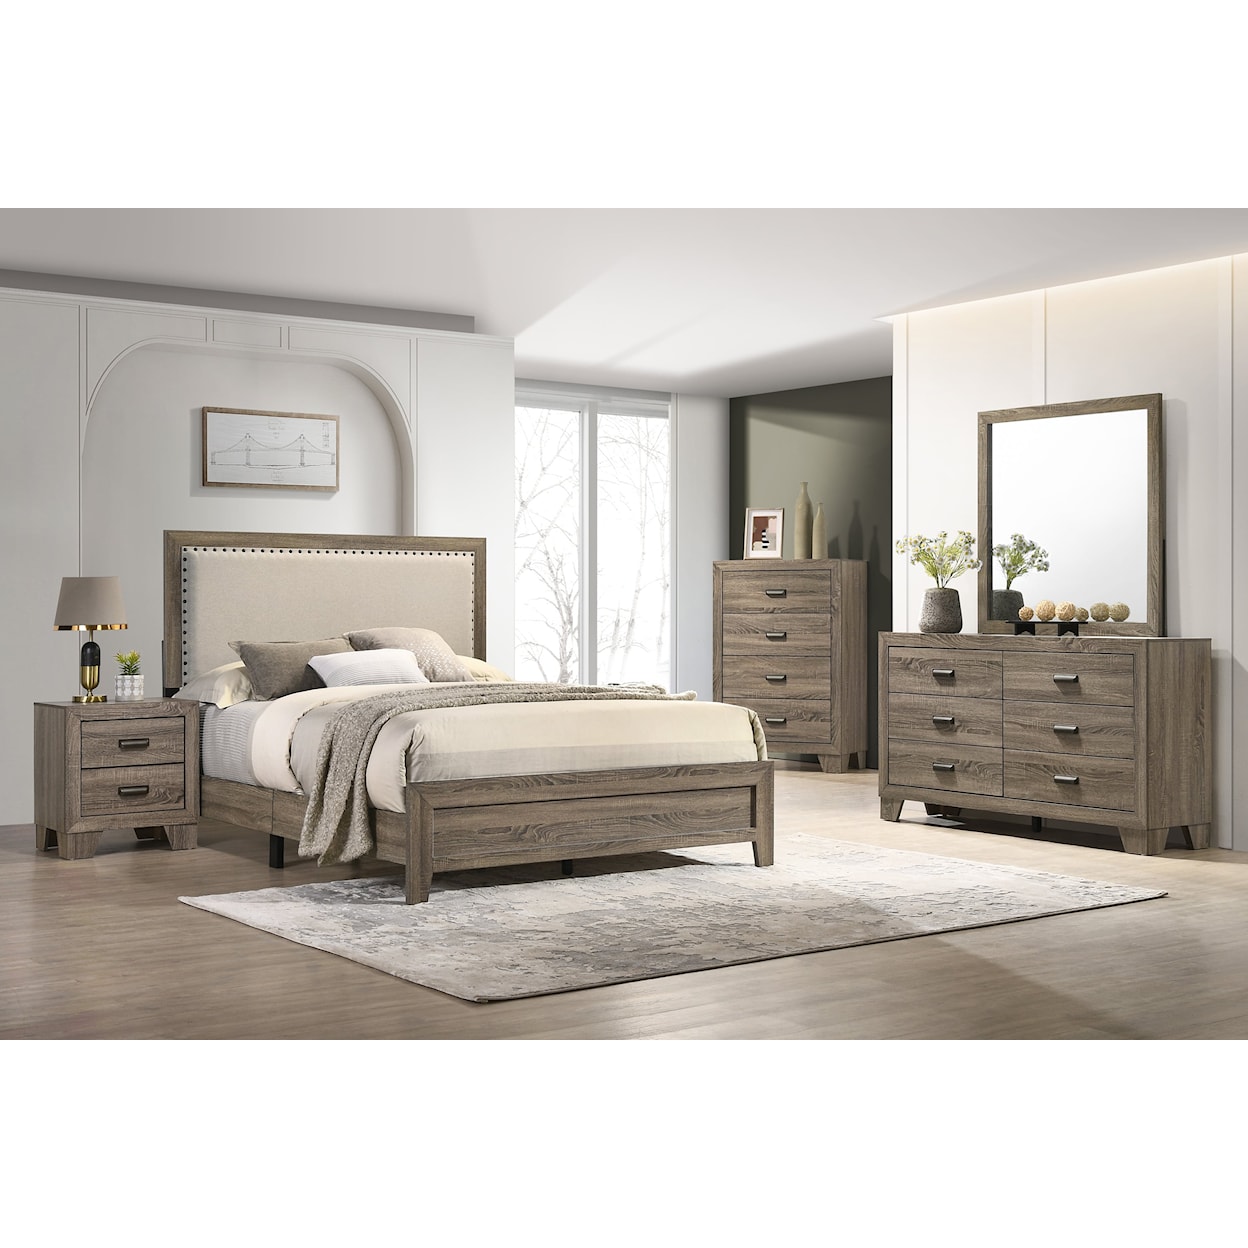 CM Millie Upholstery Bed One Box -Grey